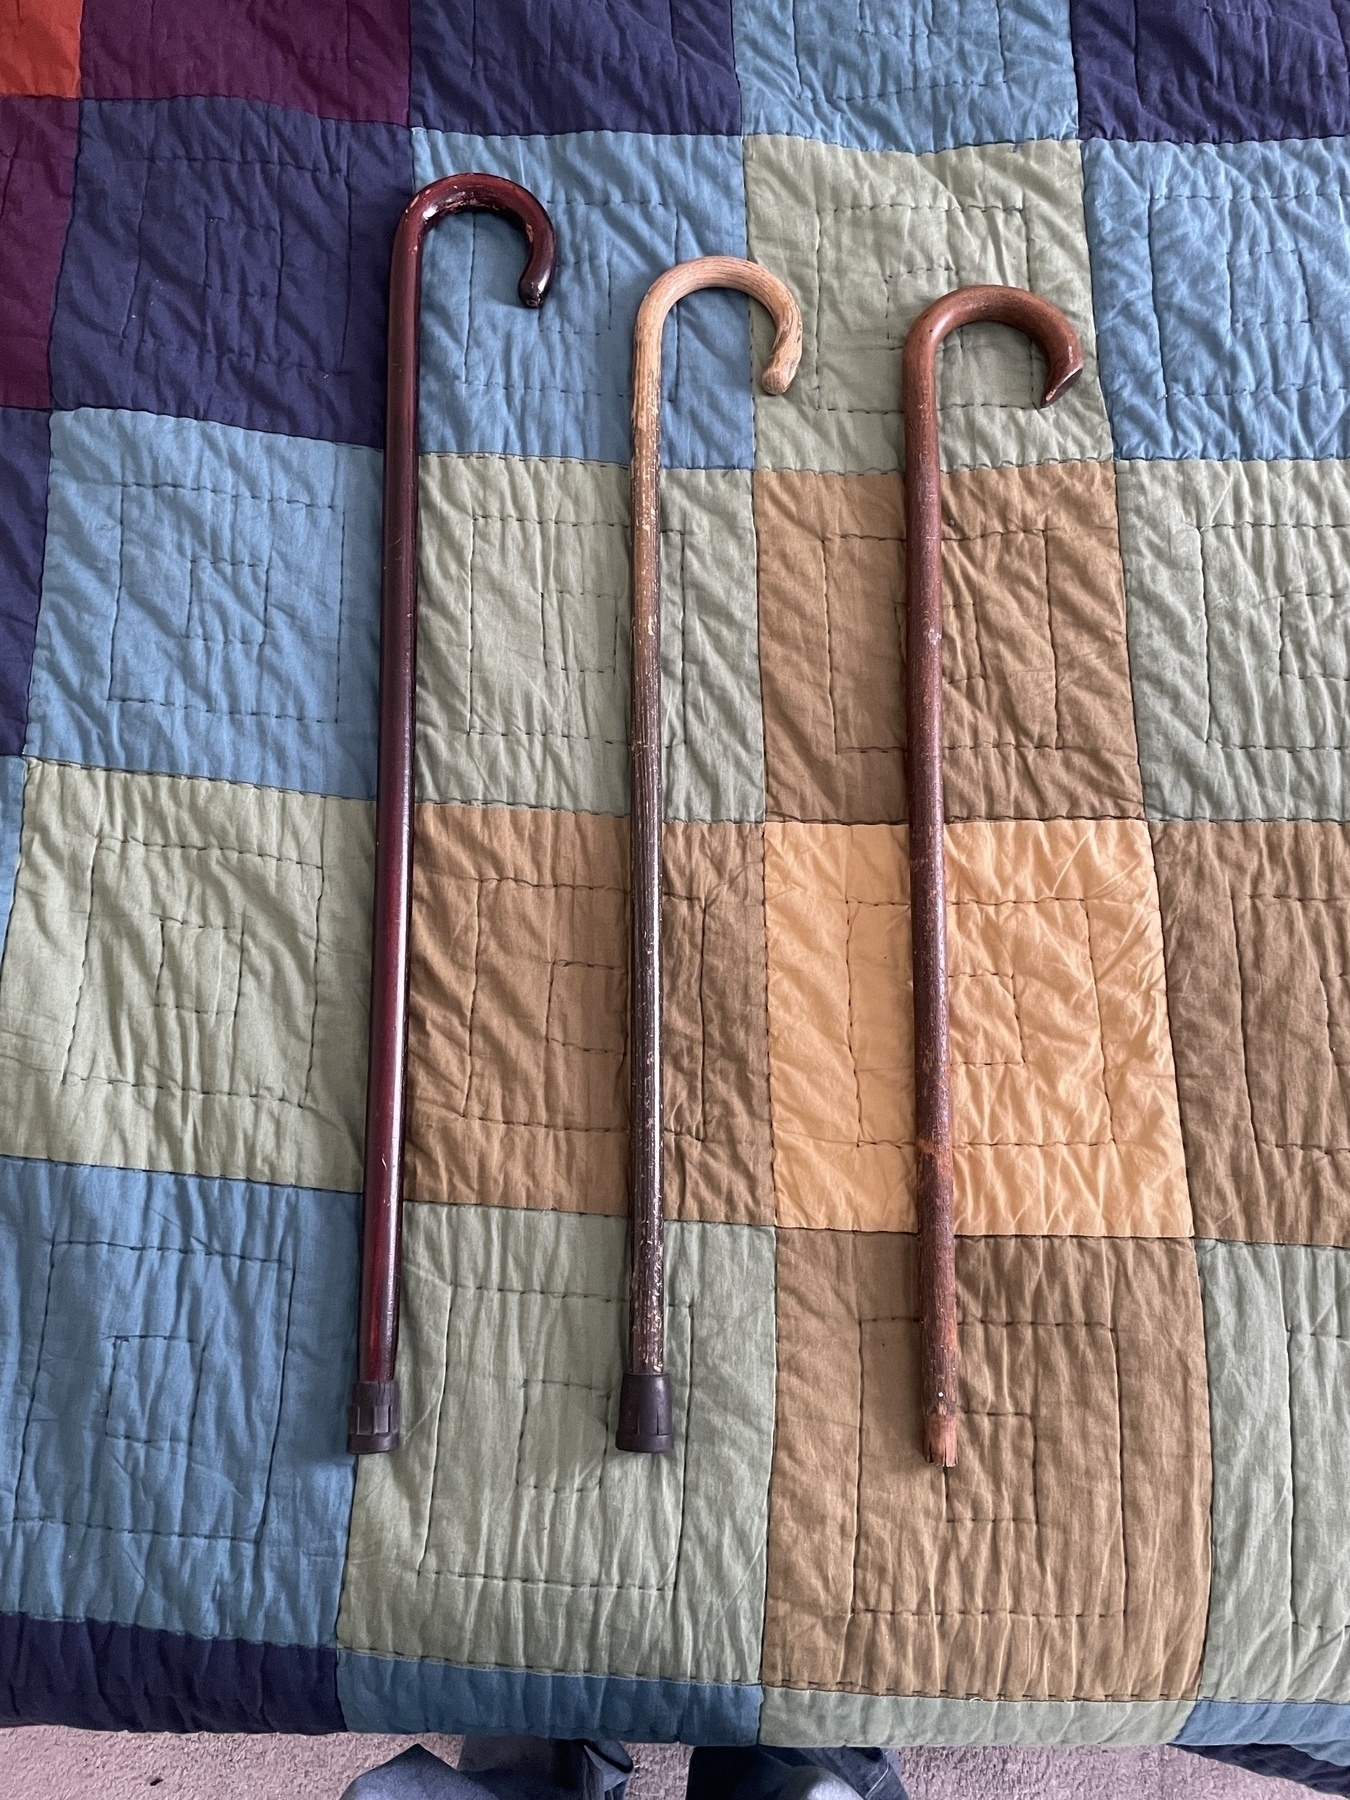 On a geometrically colored quilt, three wooden canes are laid in descending order of height. All are worn; the third is missing a rubber foot. 